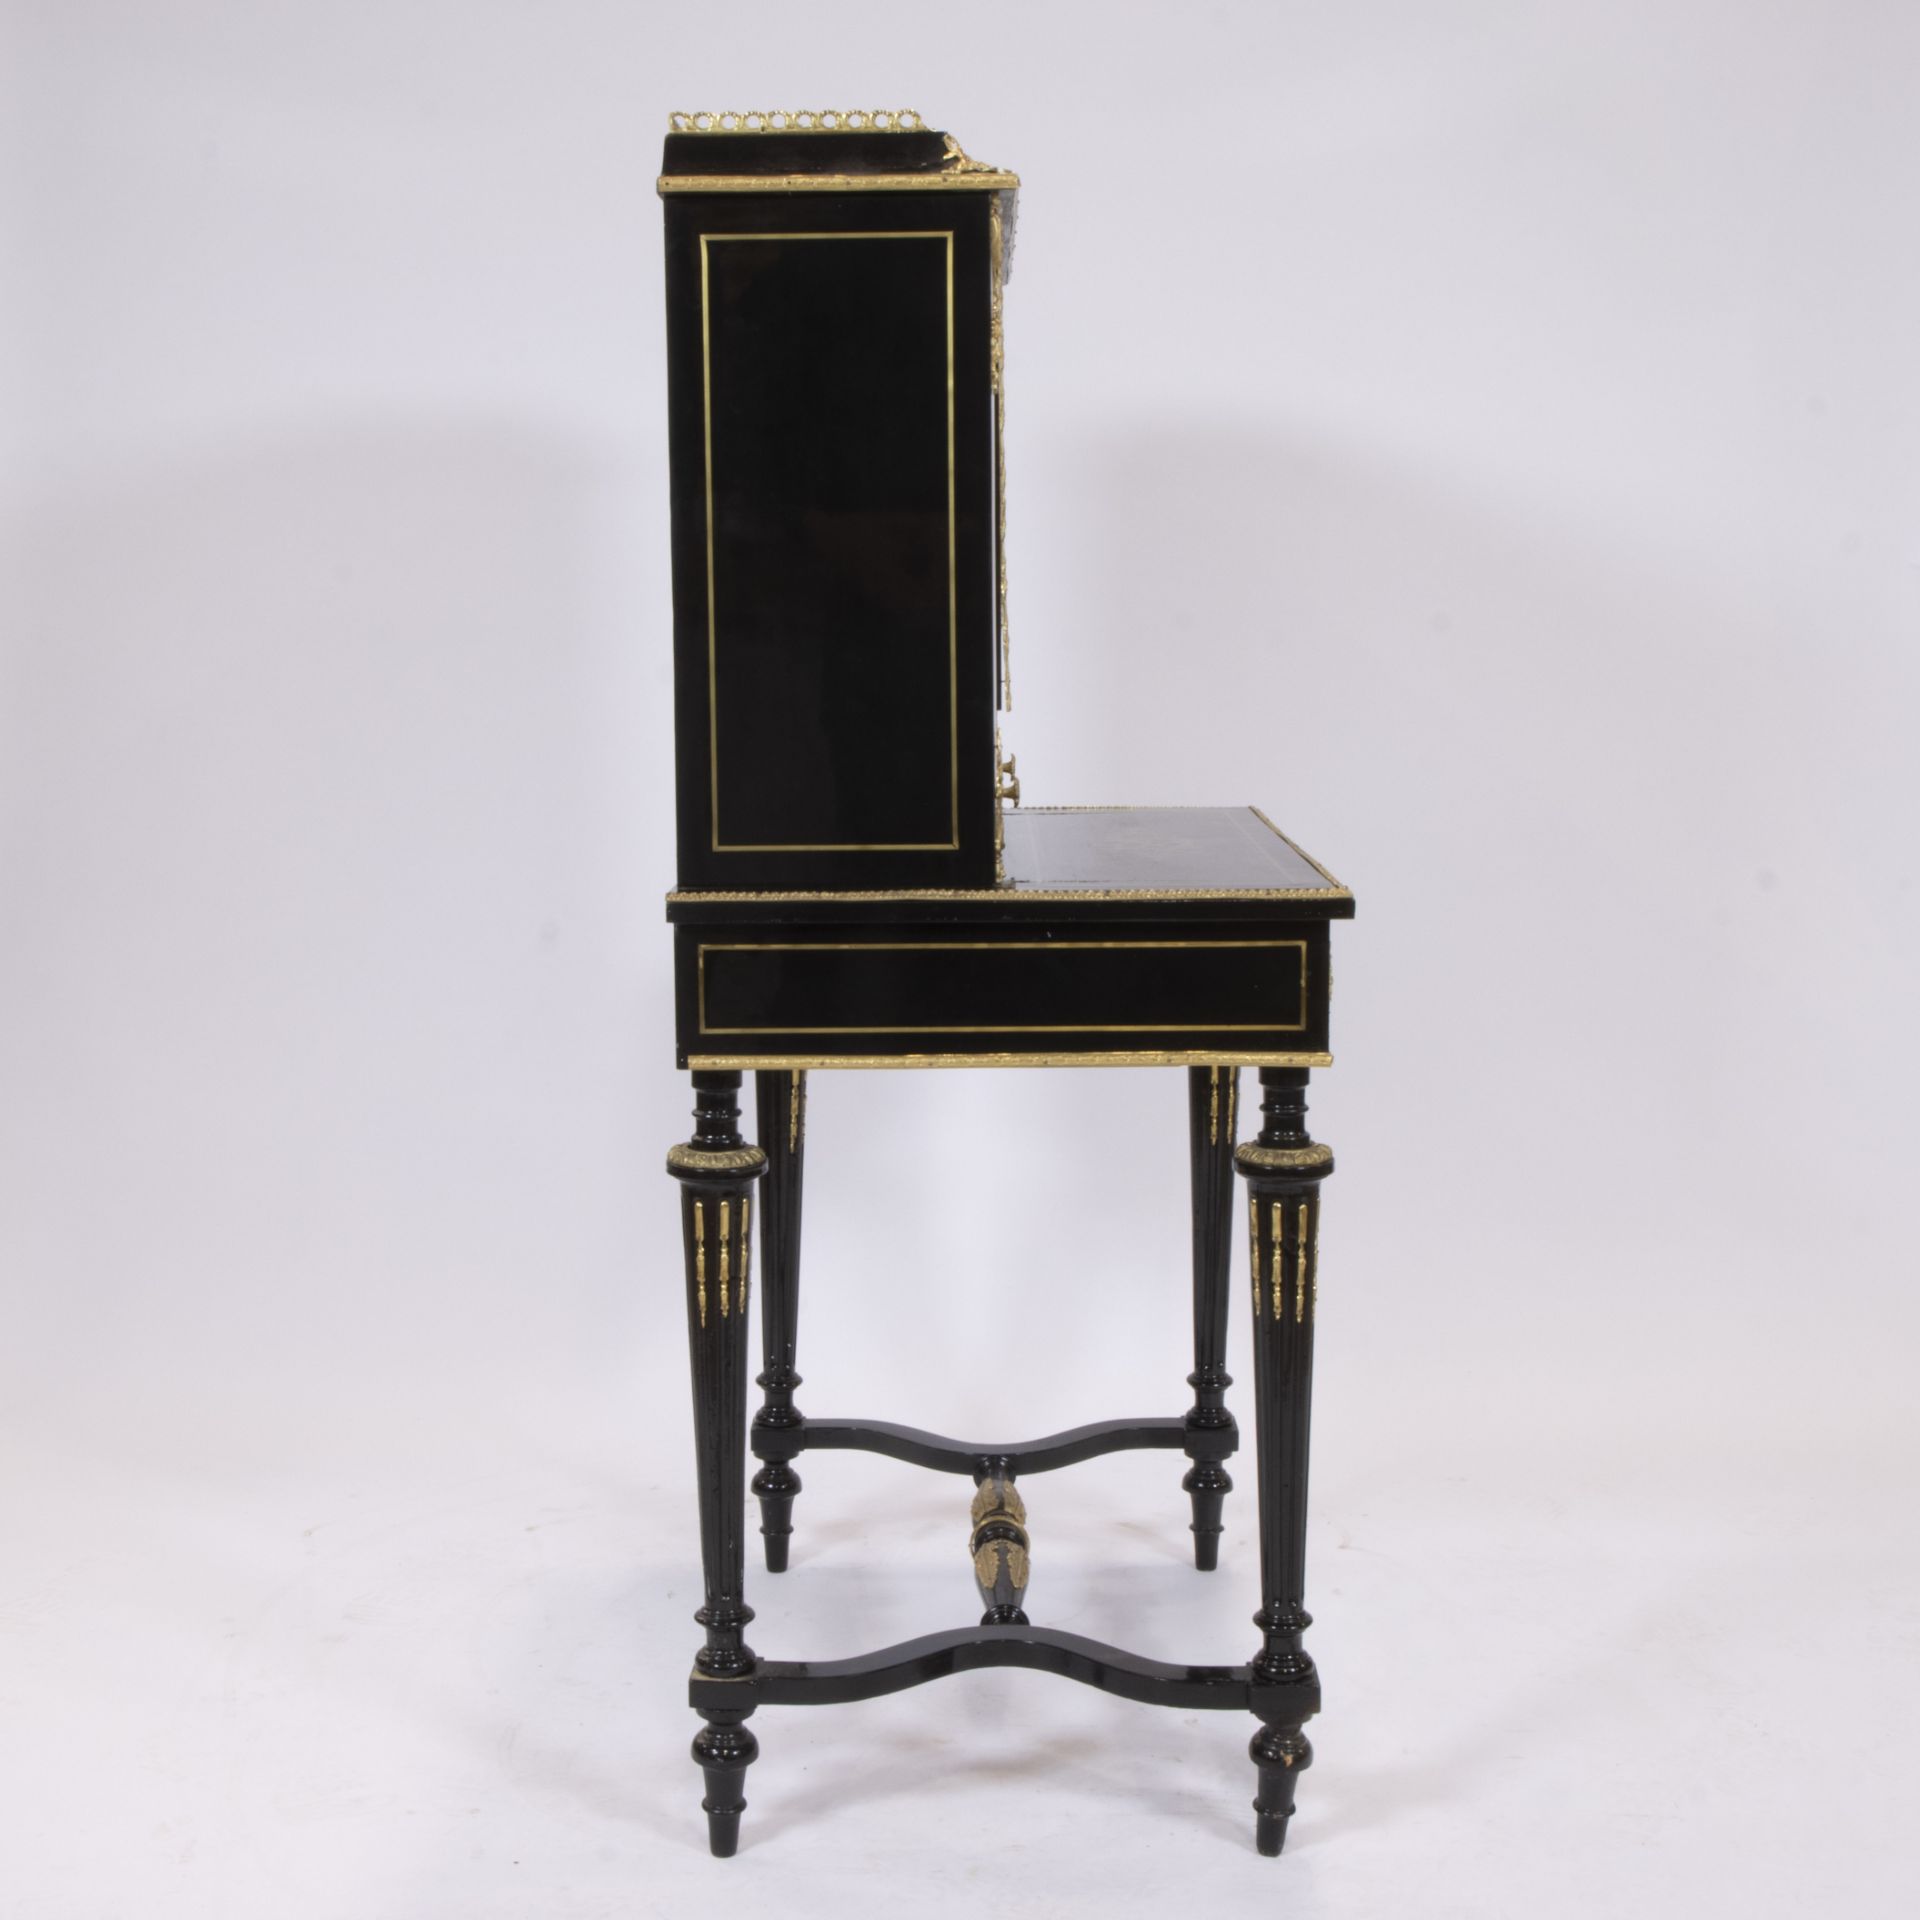 Black lacquered furniture Napoleon III Bonheur du Jour with gilt bronze fittings - Image 4 of 5